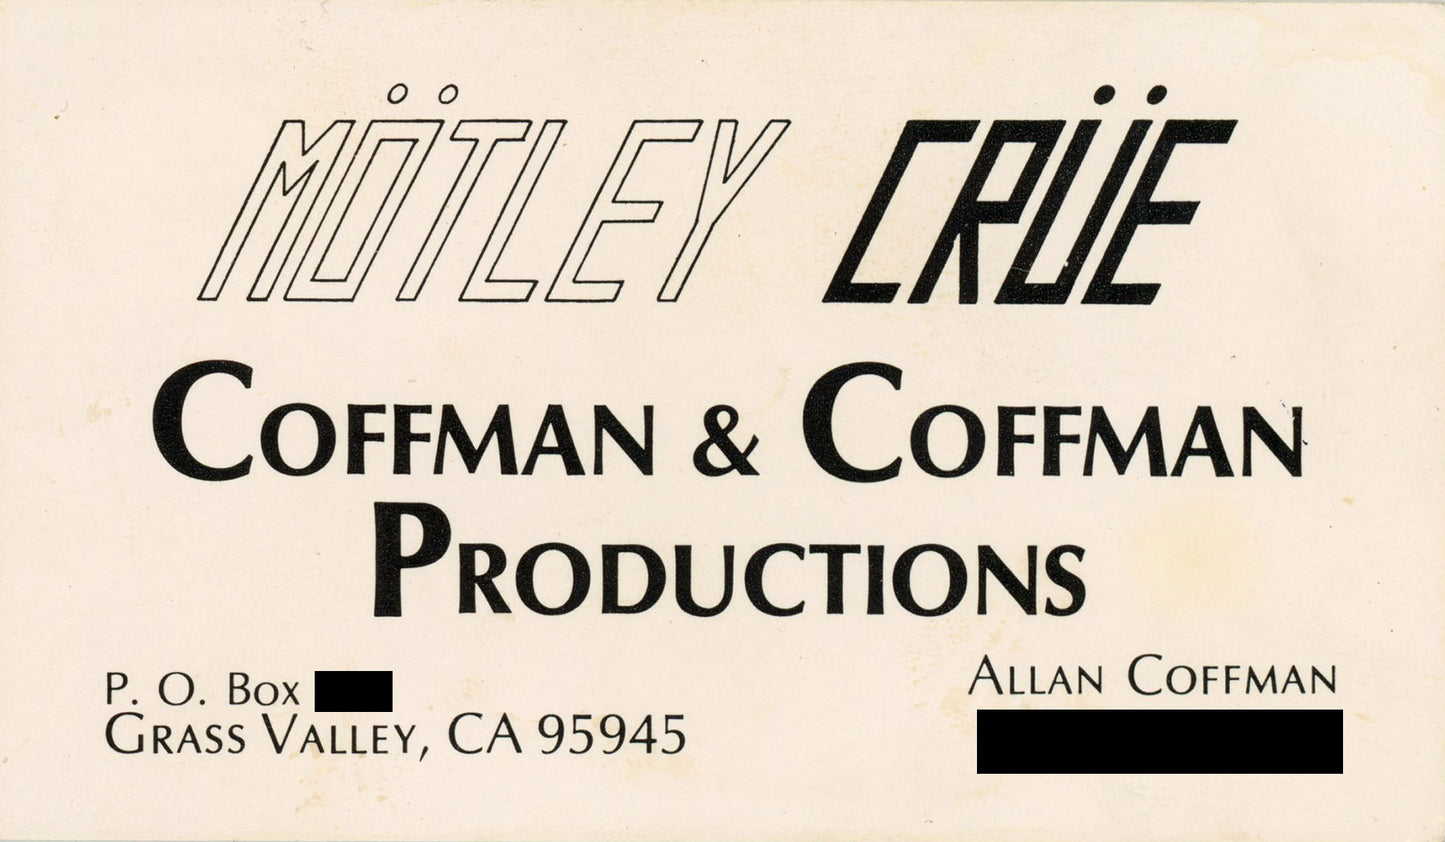 Motley Crue's first business card with Allan Coffman's business info